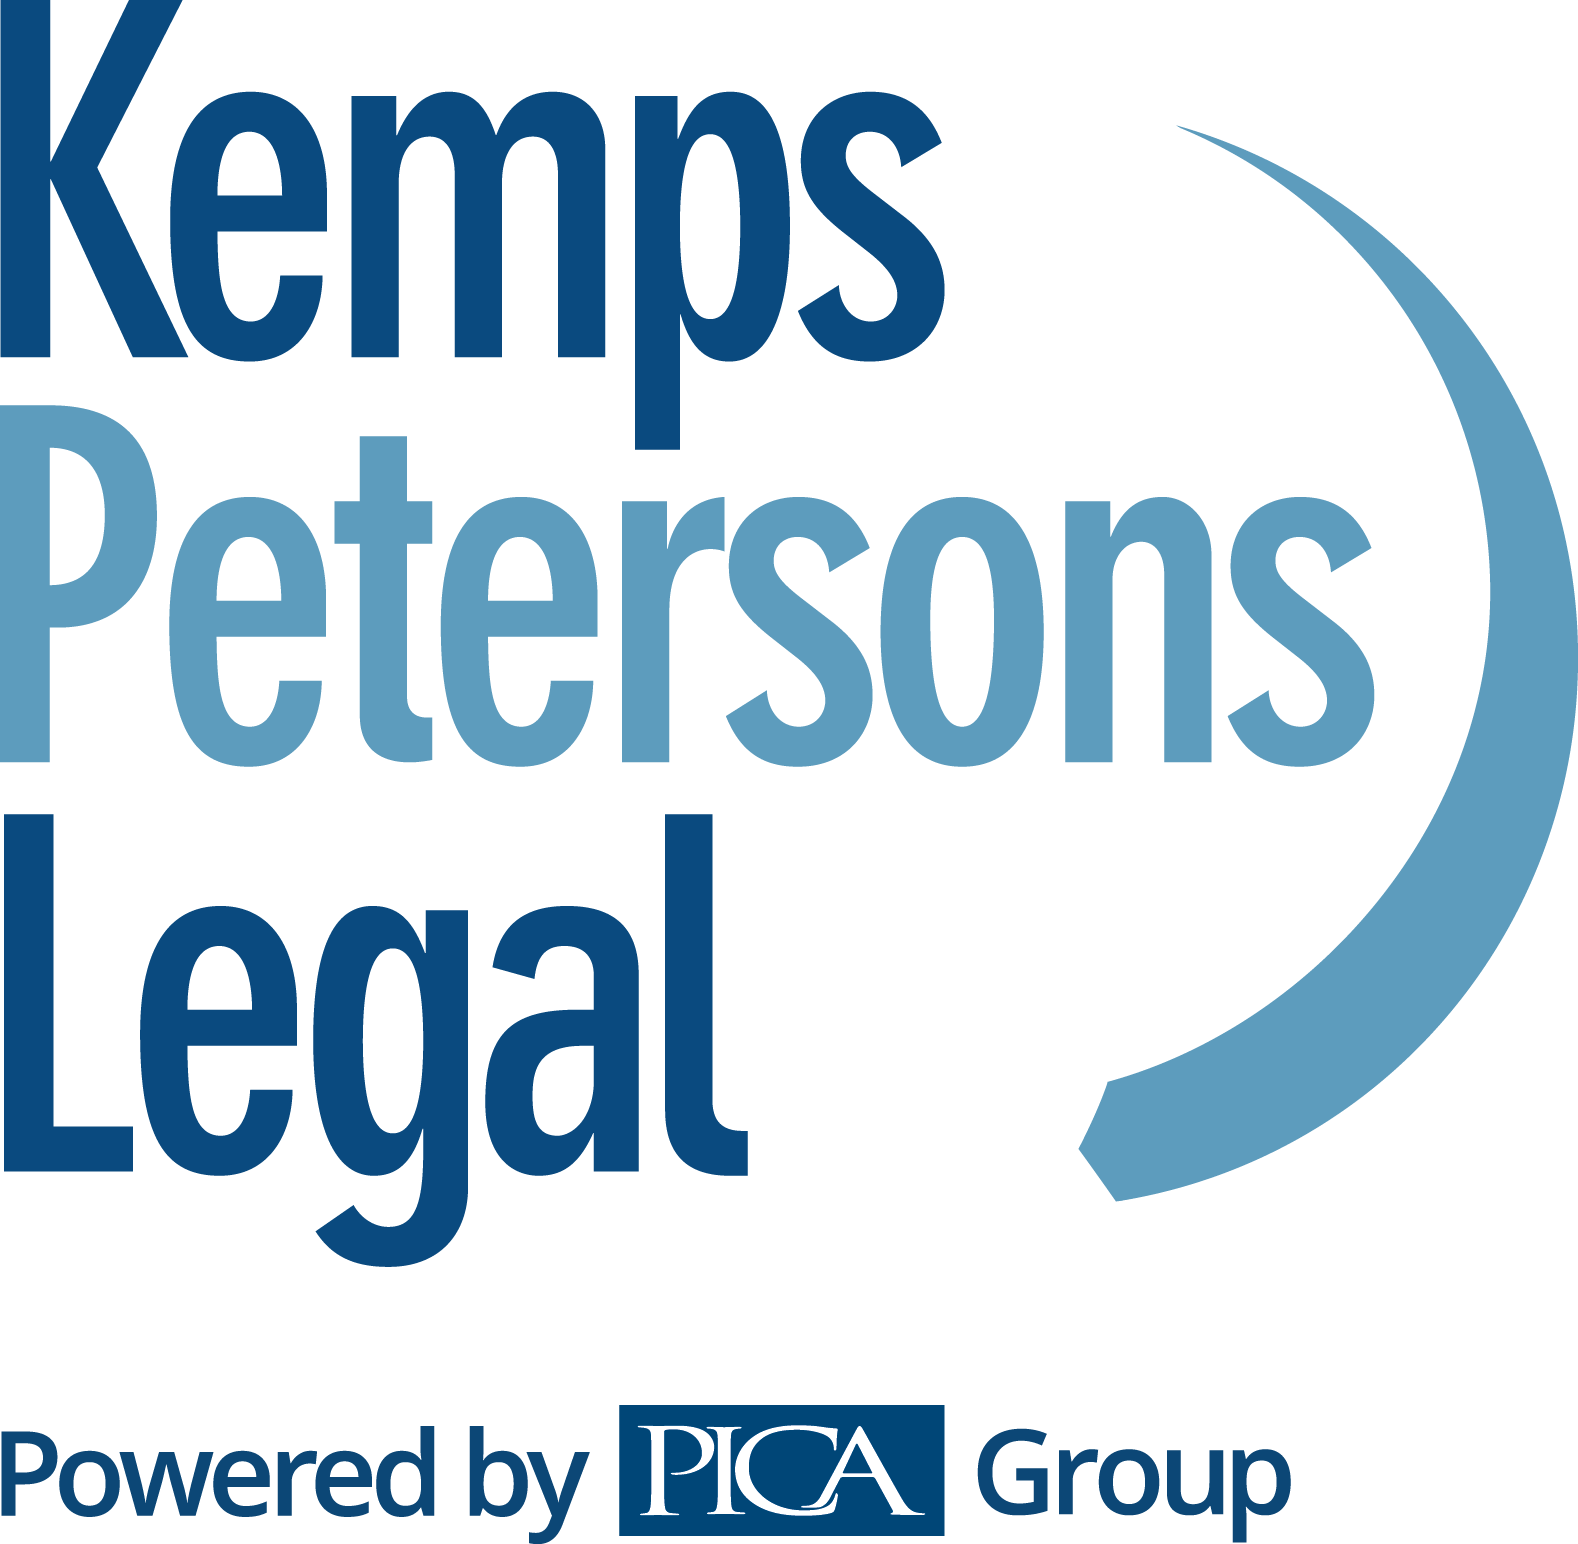 Kemp's Logo - Kemps Peterson Legal of the PICA Group Kemps Peterson Legal